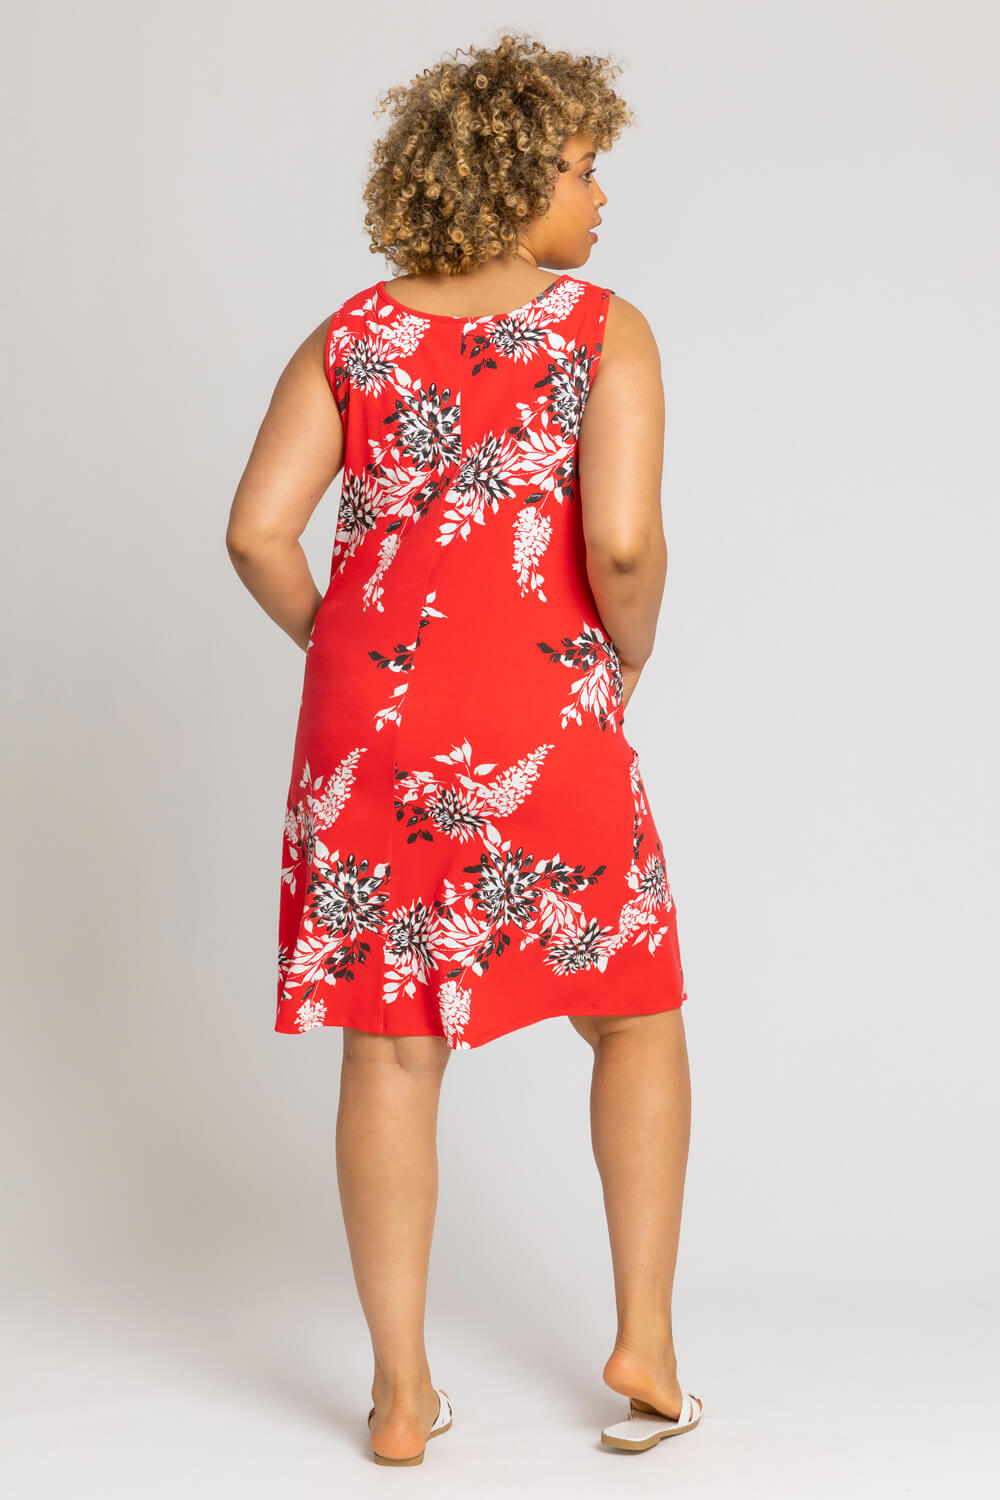 Red Curve Floral Print Swing Dress, Image 2 of 4